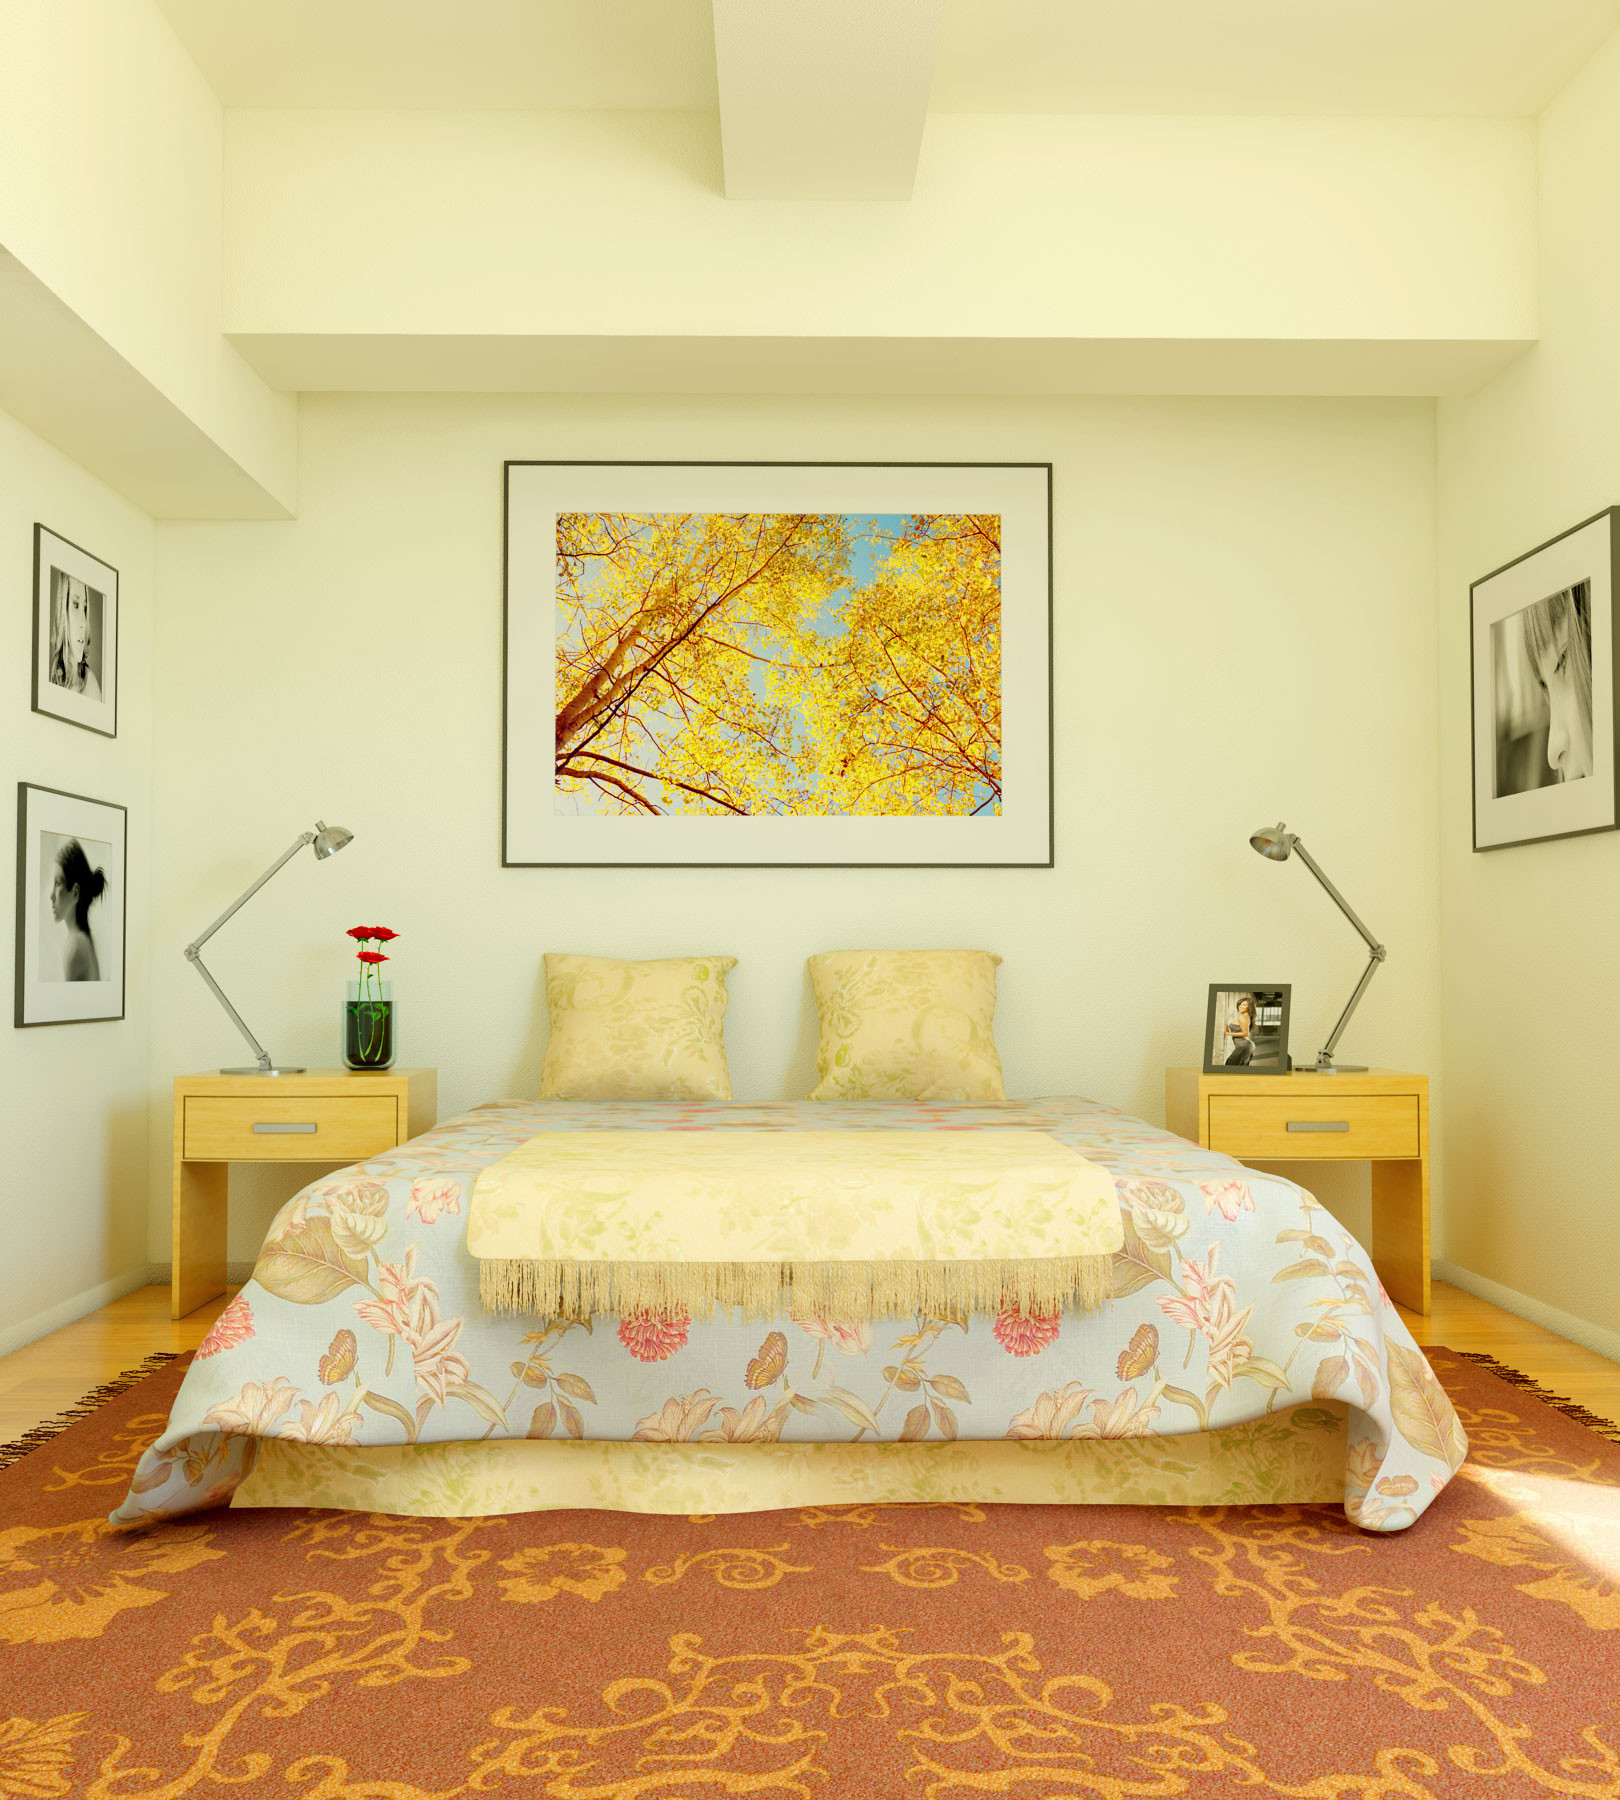 Best Paint Colors For Bedroom
 Best Paint Colors for Small Room – Some Tips – HomesFeed